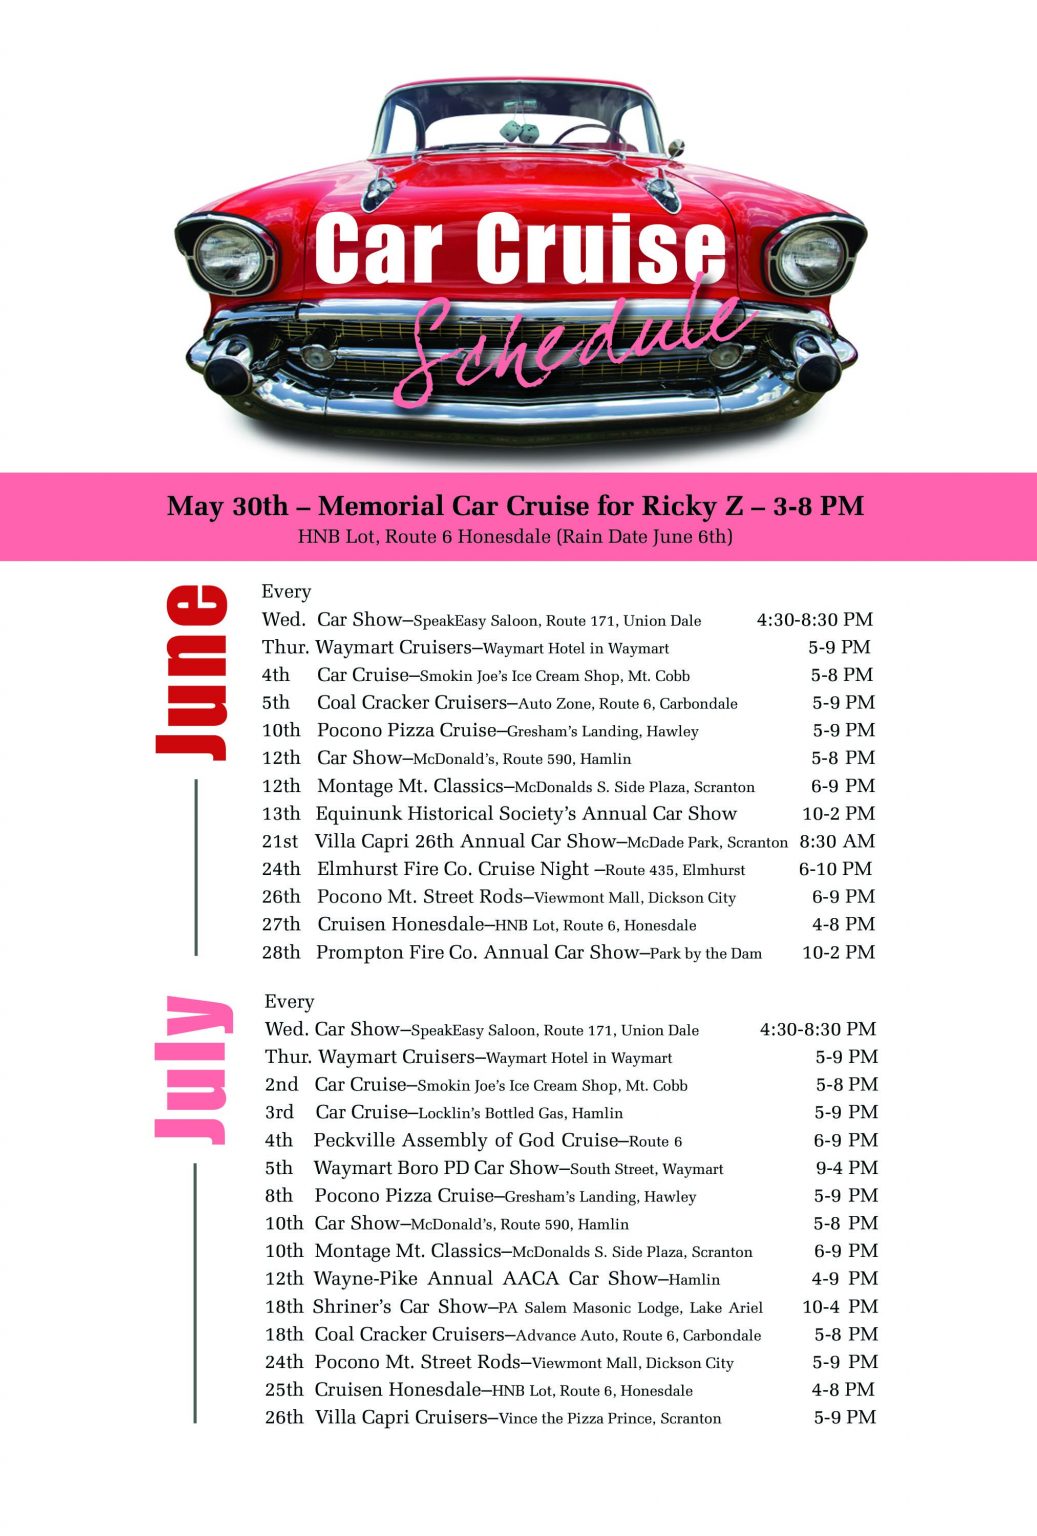 Car Cruise Schedule - Connections Magazine